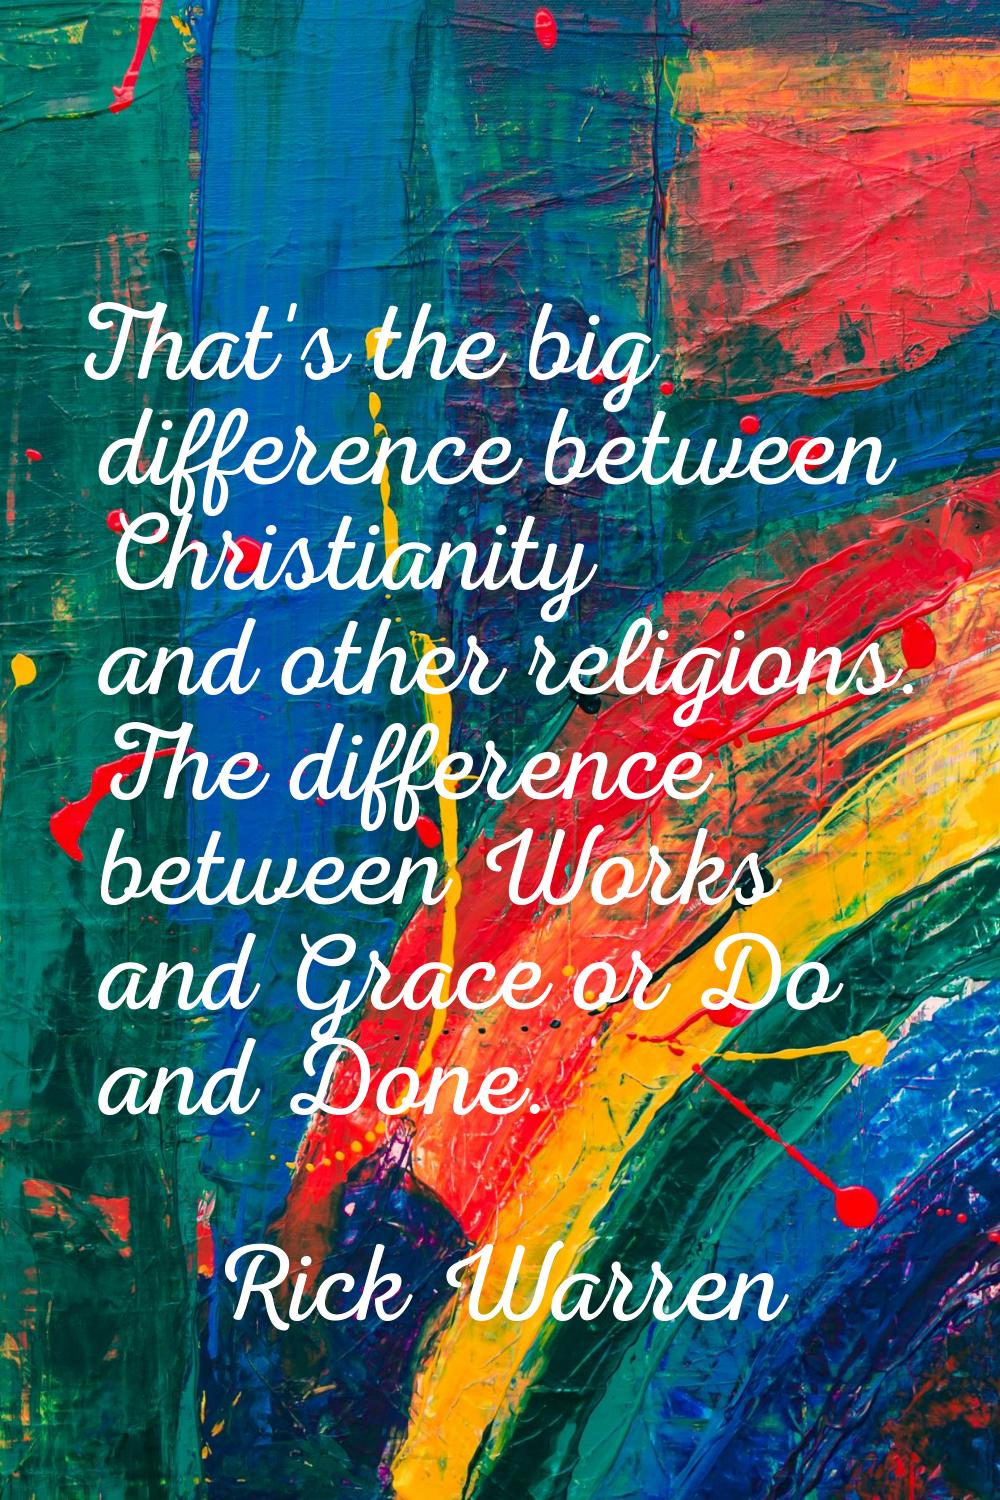 That's the big difference between Christianity and other religions. The difference between Works an